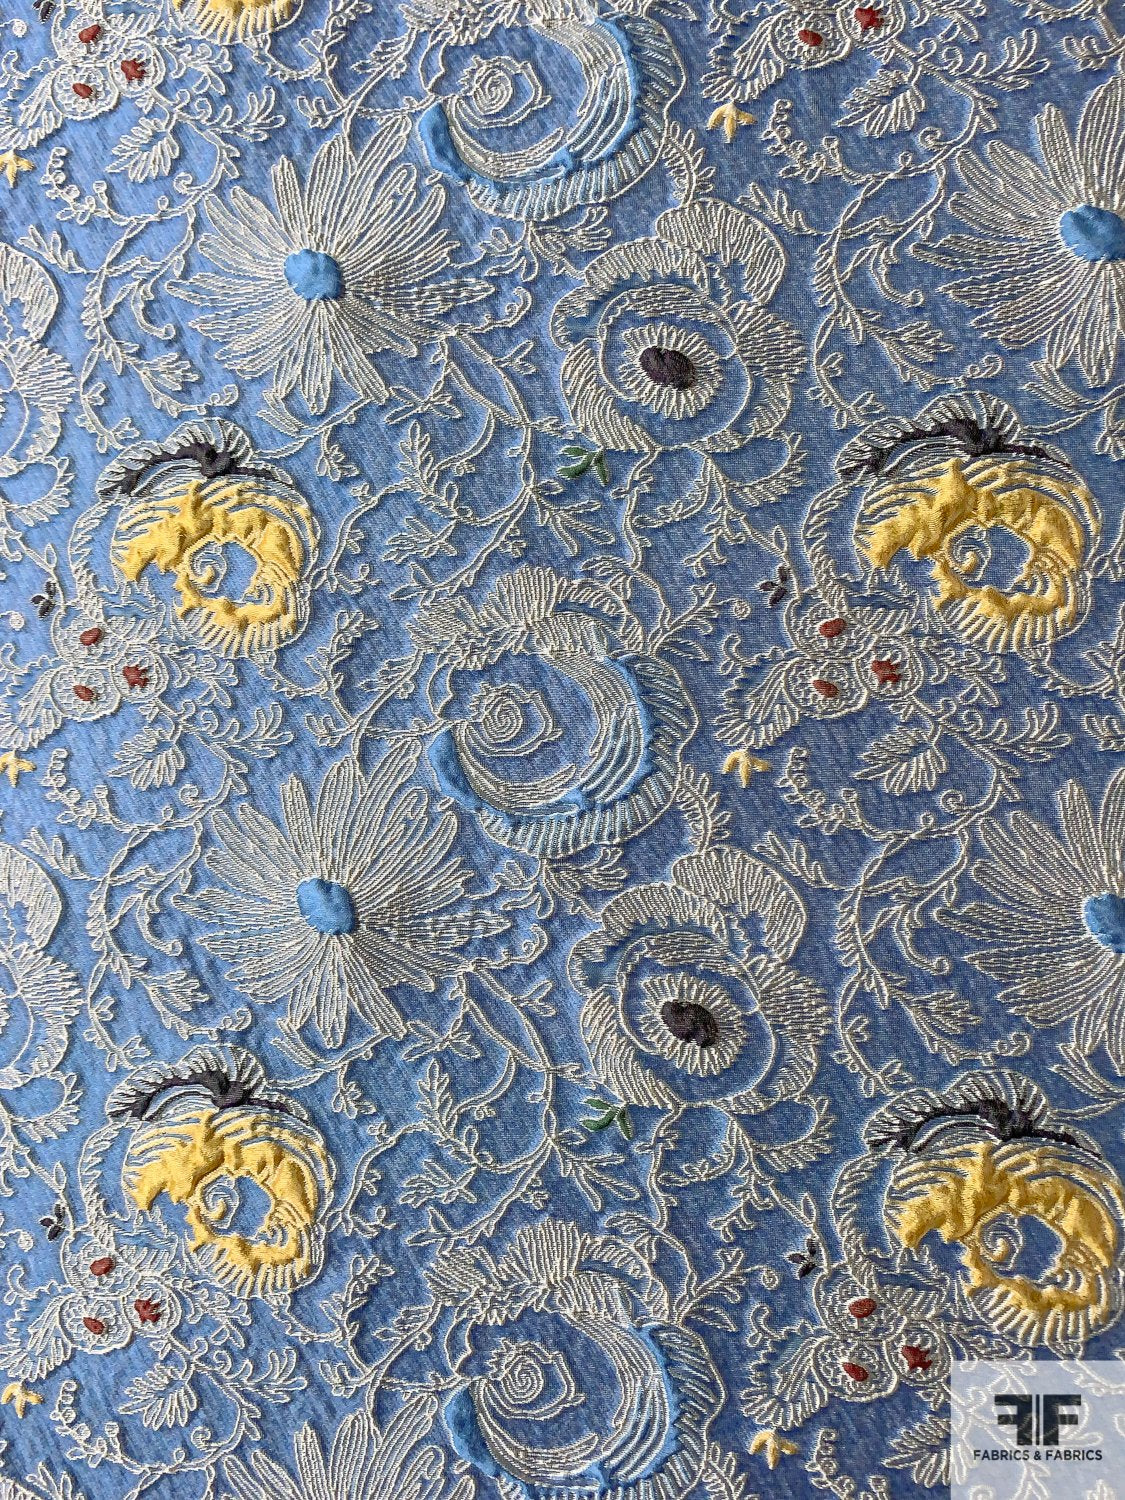 Famous NYC Designer Italian Unique Floral Textured Brocade - Soothing Blue / Yellow / White / Maroon